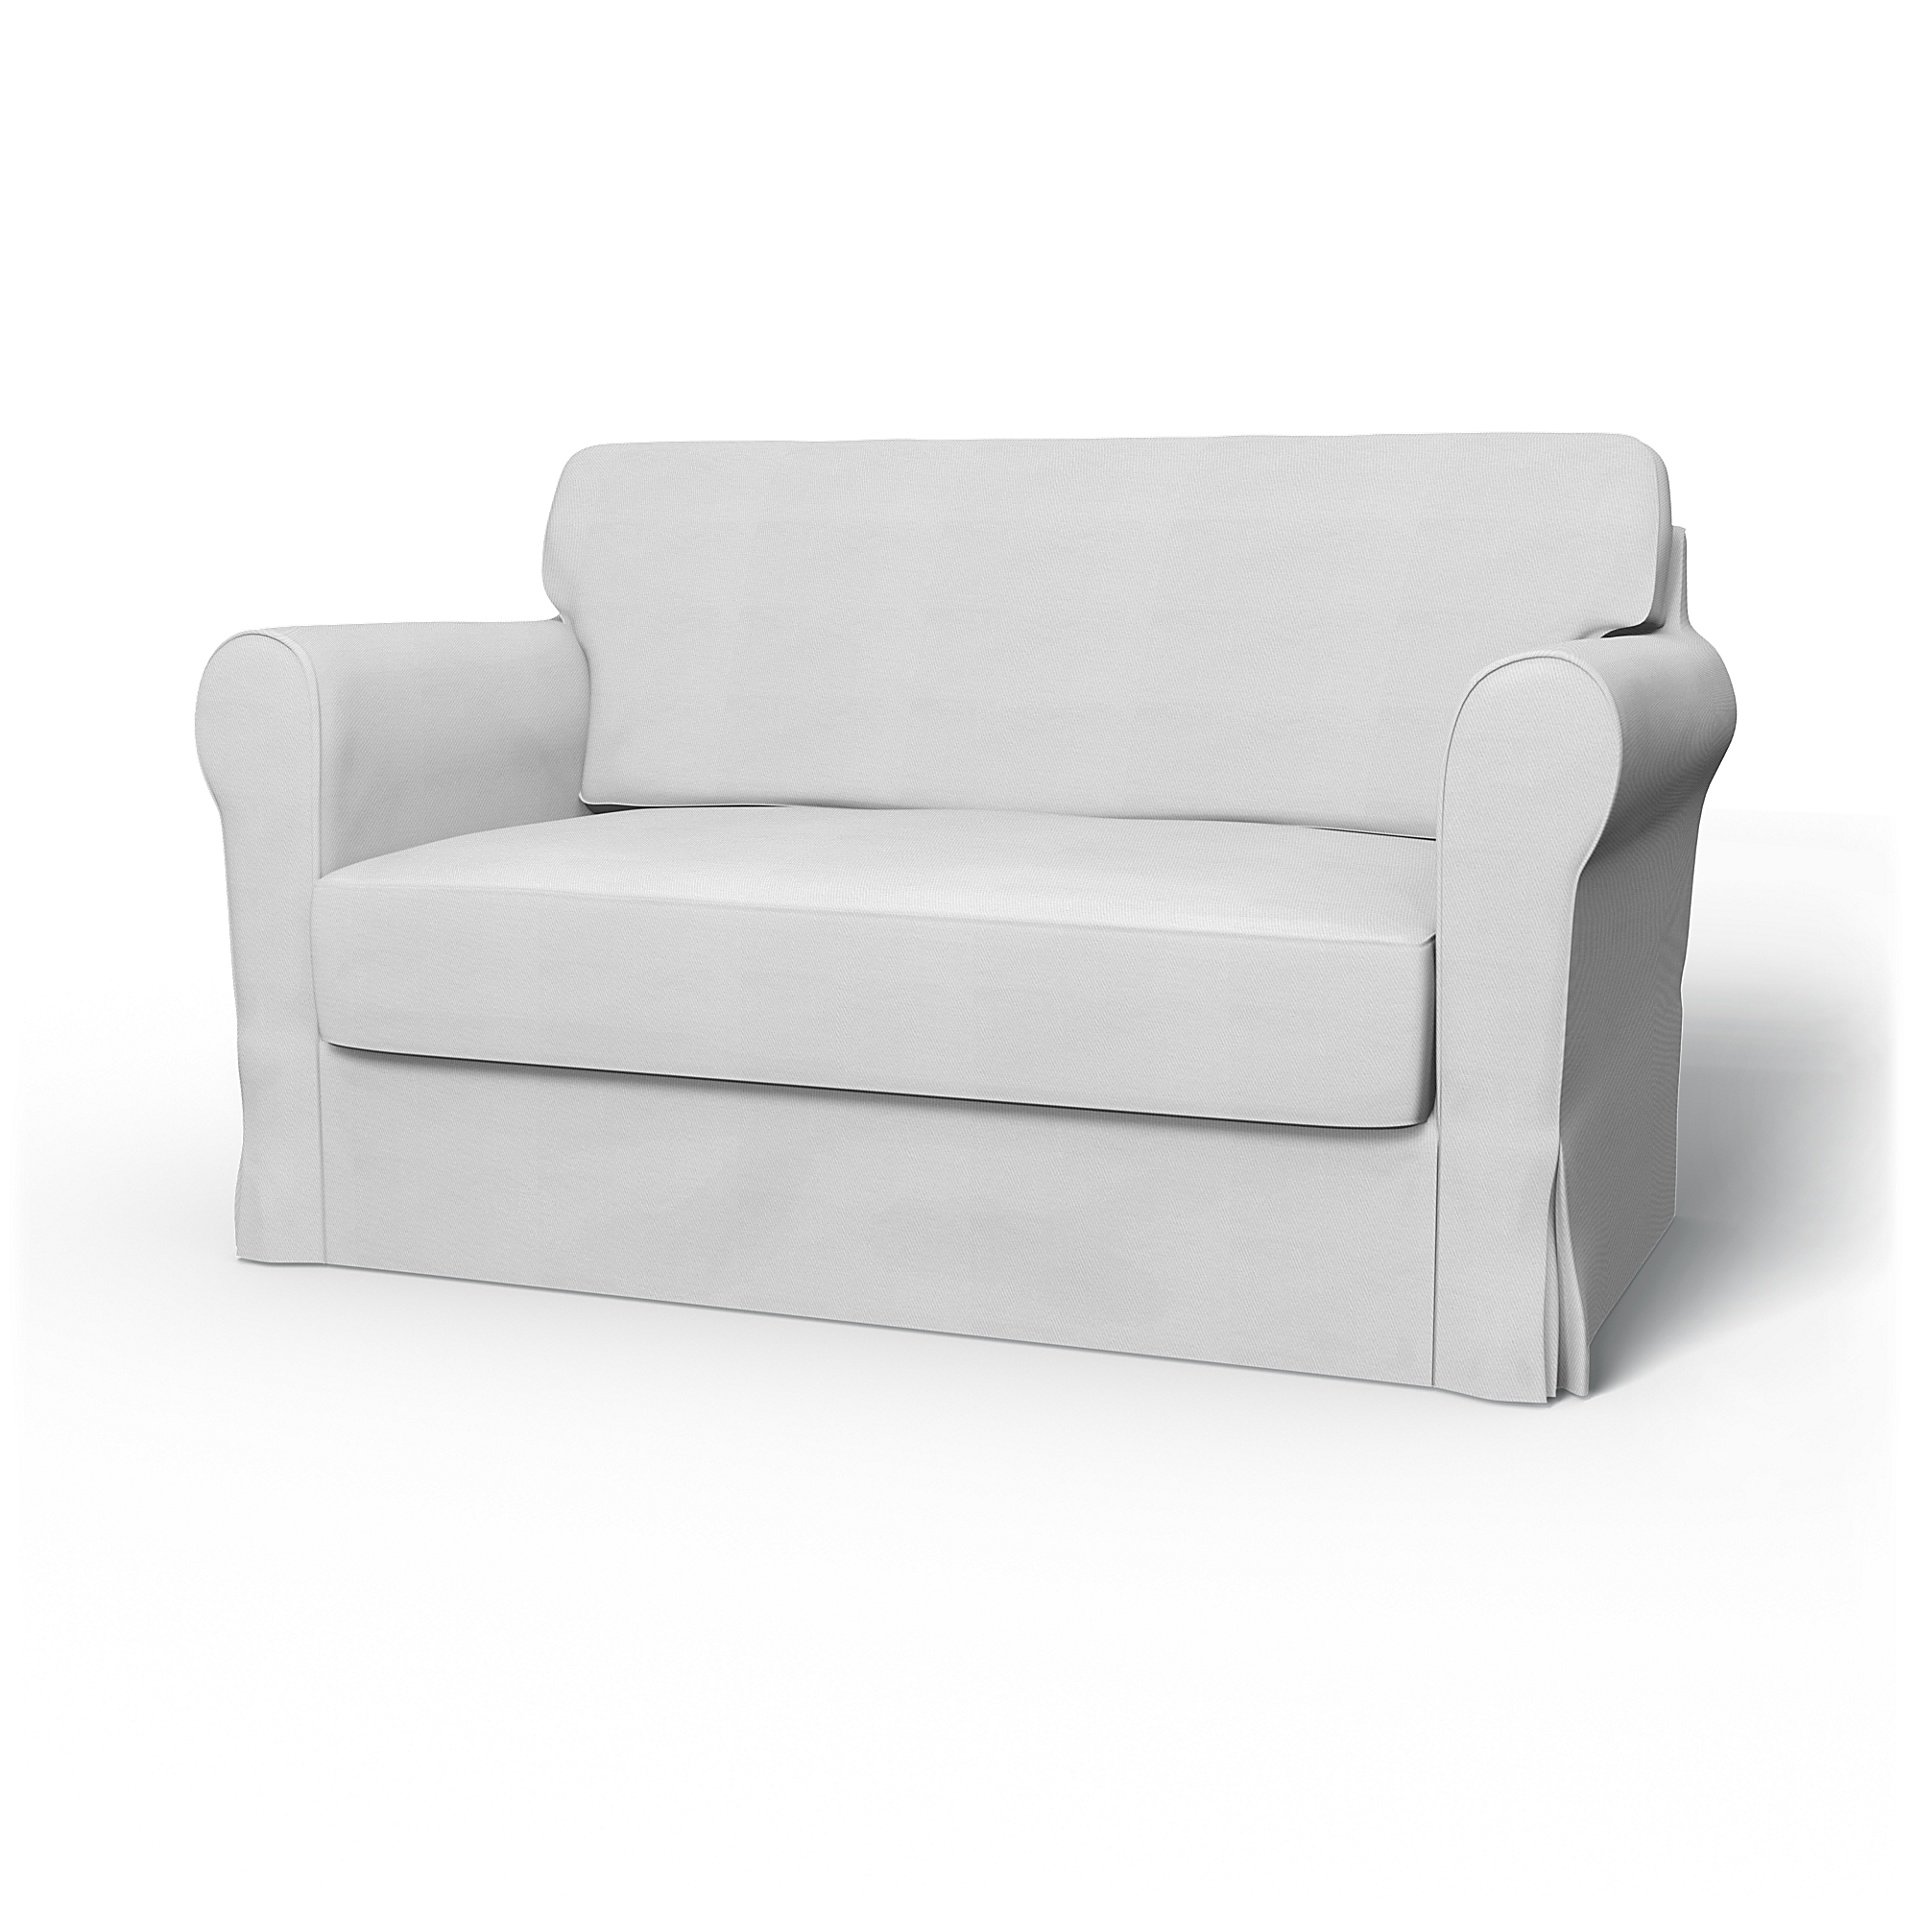 Discontinued Ikea Hagalund Sofa Beds, Which Ikea Sofa Bed Is The Best